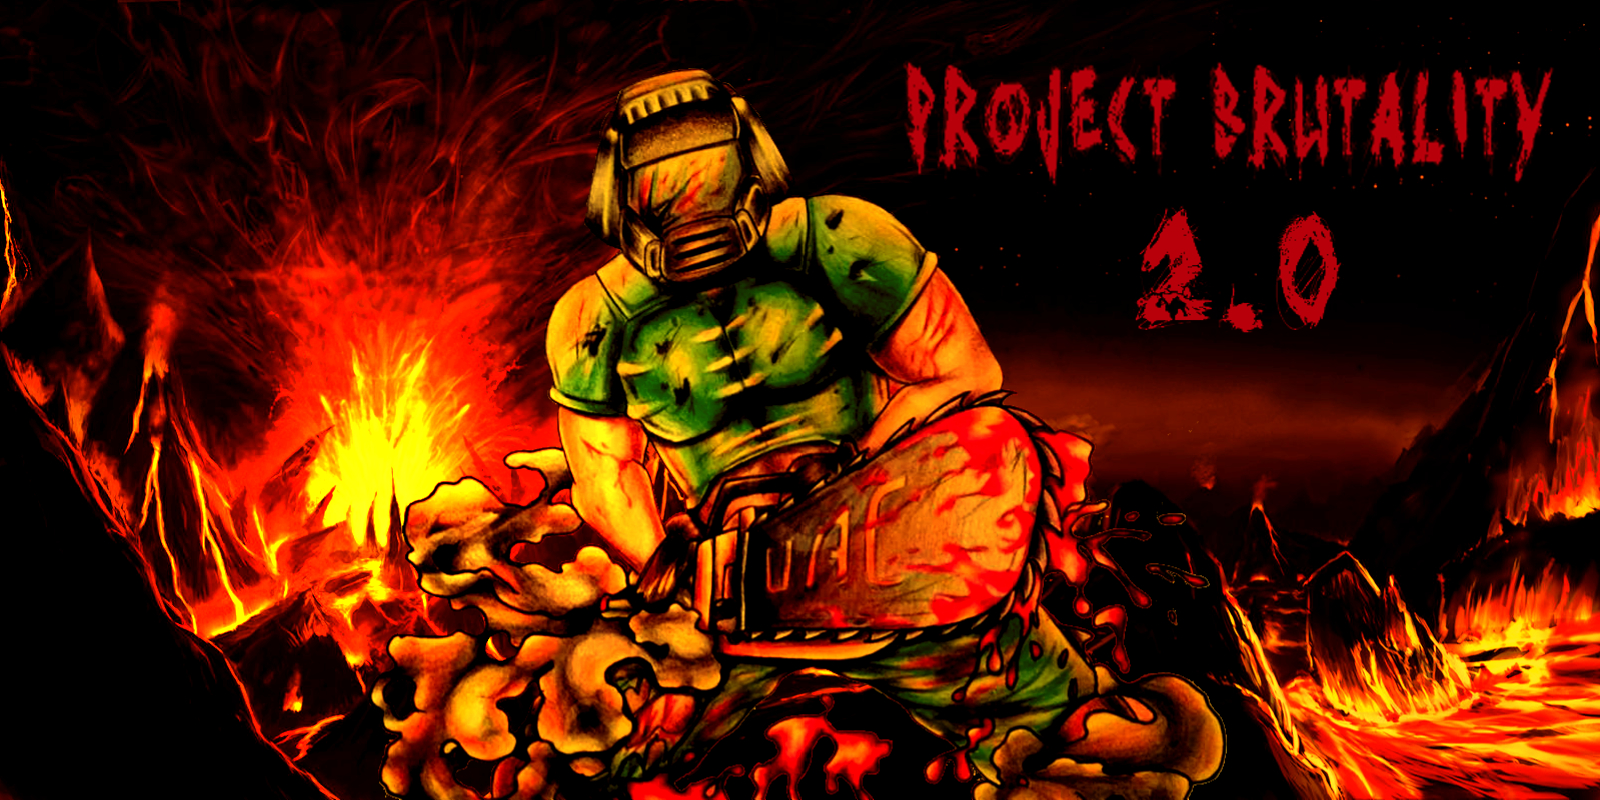 project brutality 3.0 release date